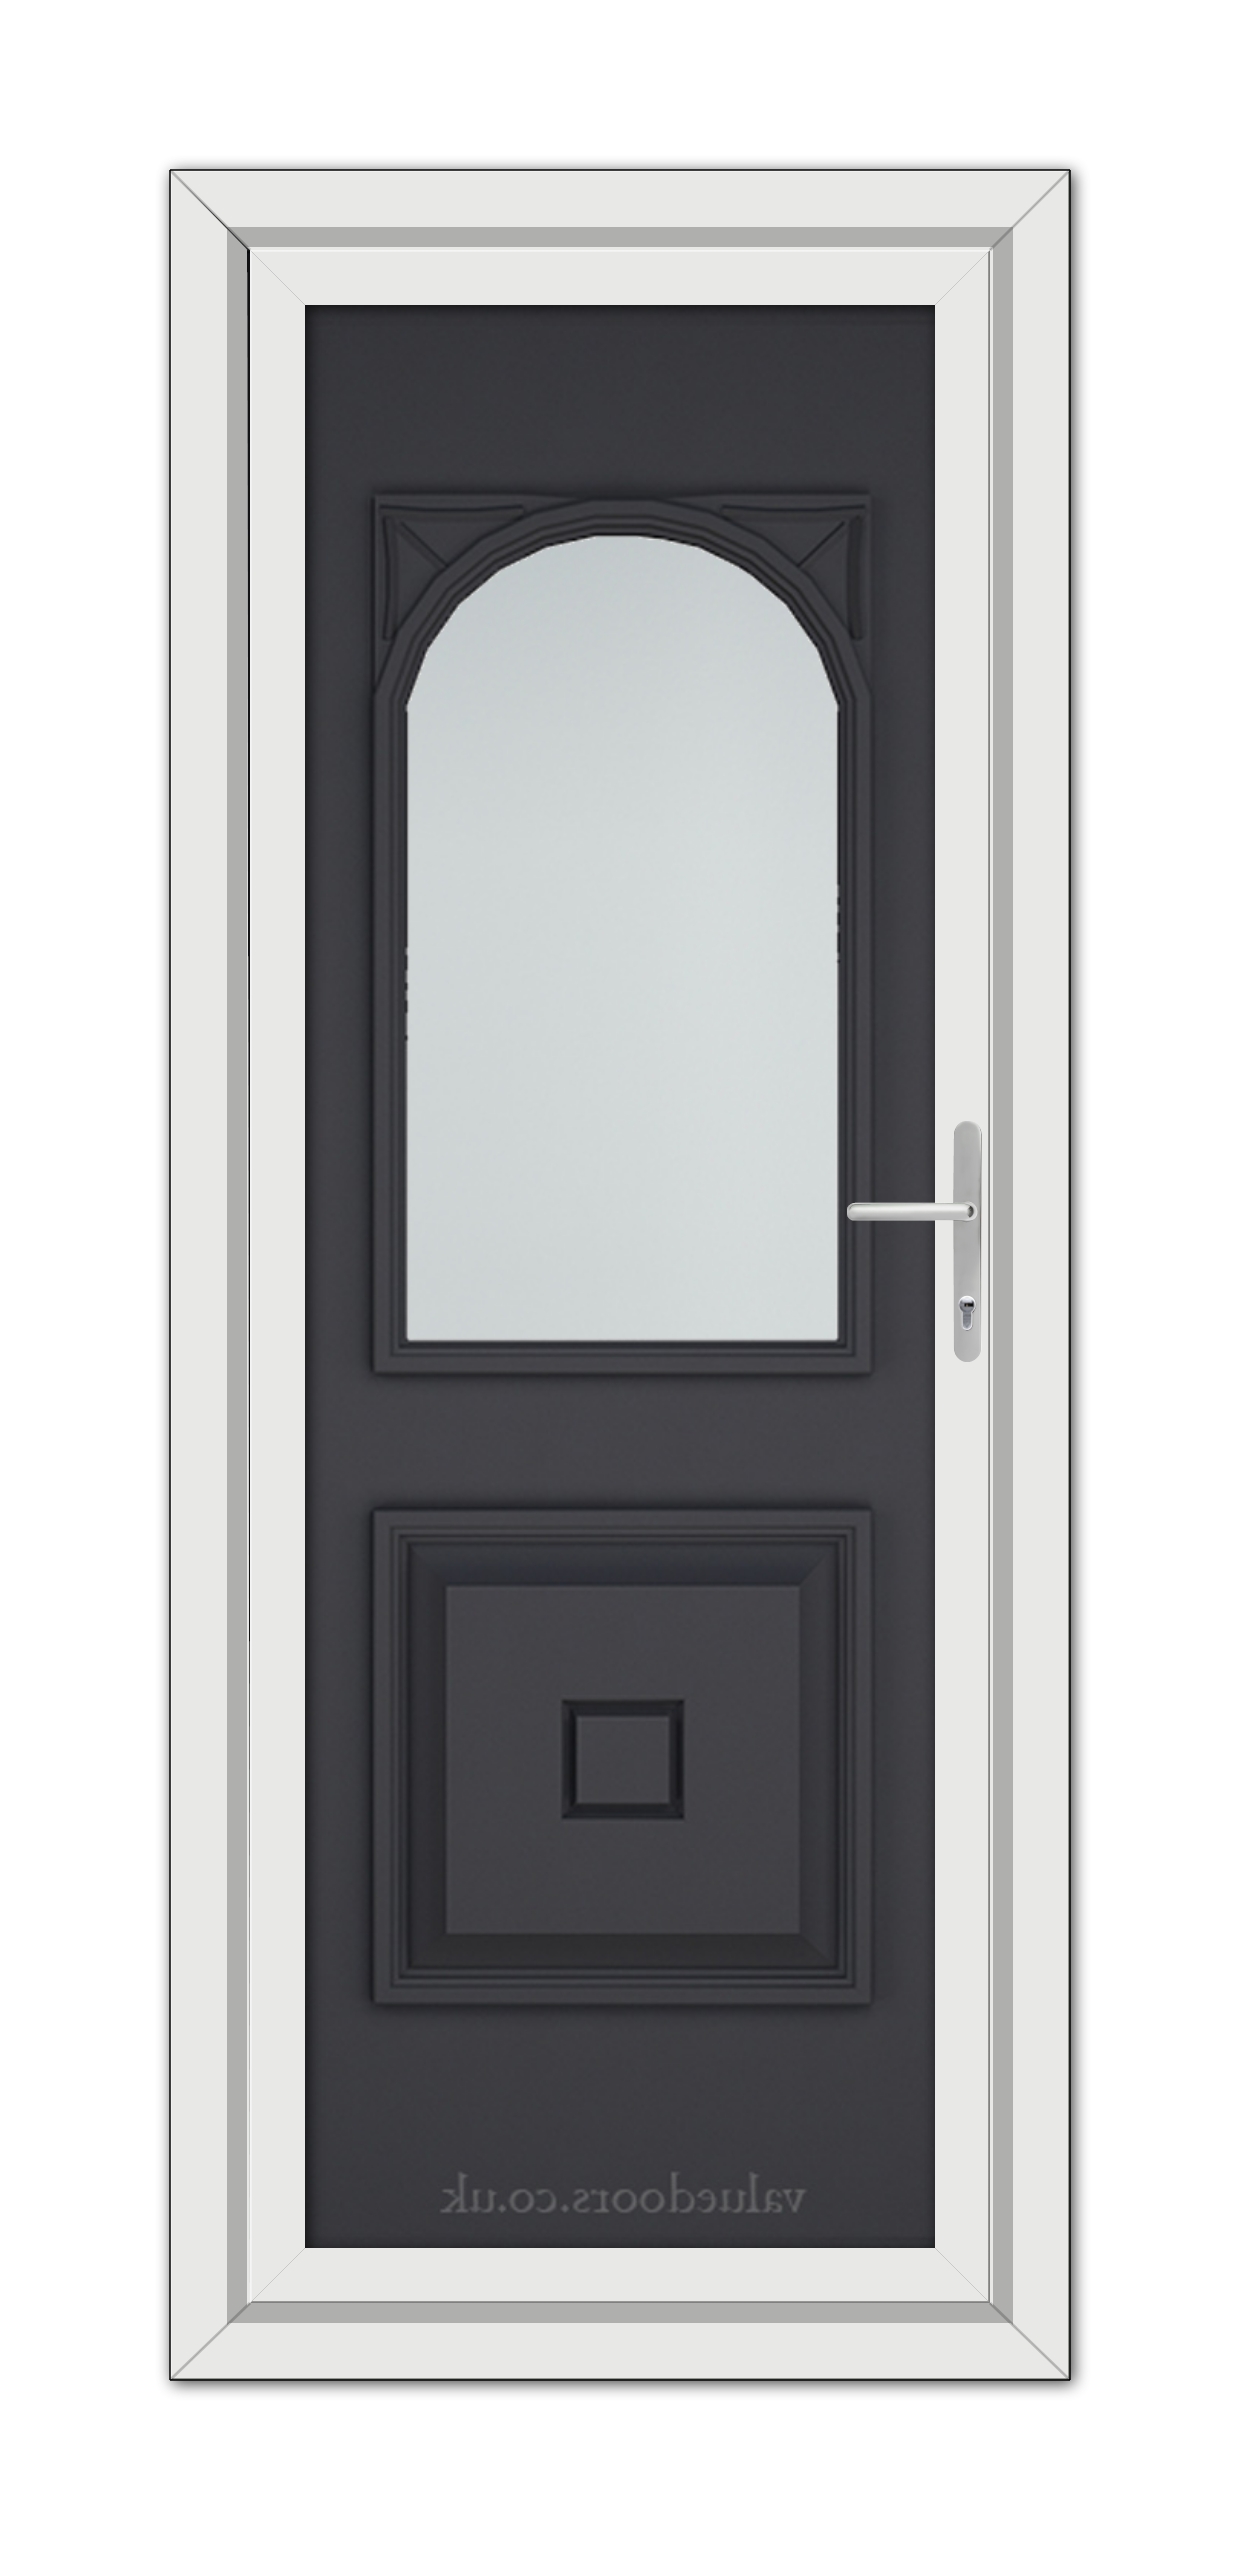 A modern Grey Reims uPVC door with a vertical glass panel, featuring a white frame and a metallic handle, isolated on a white background.